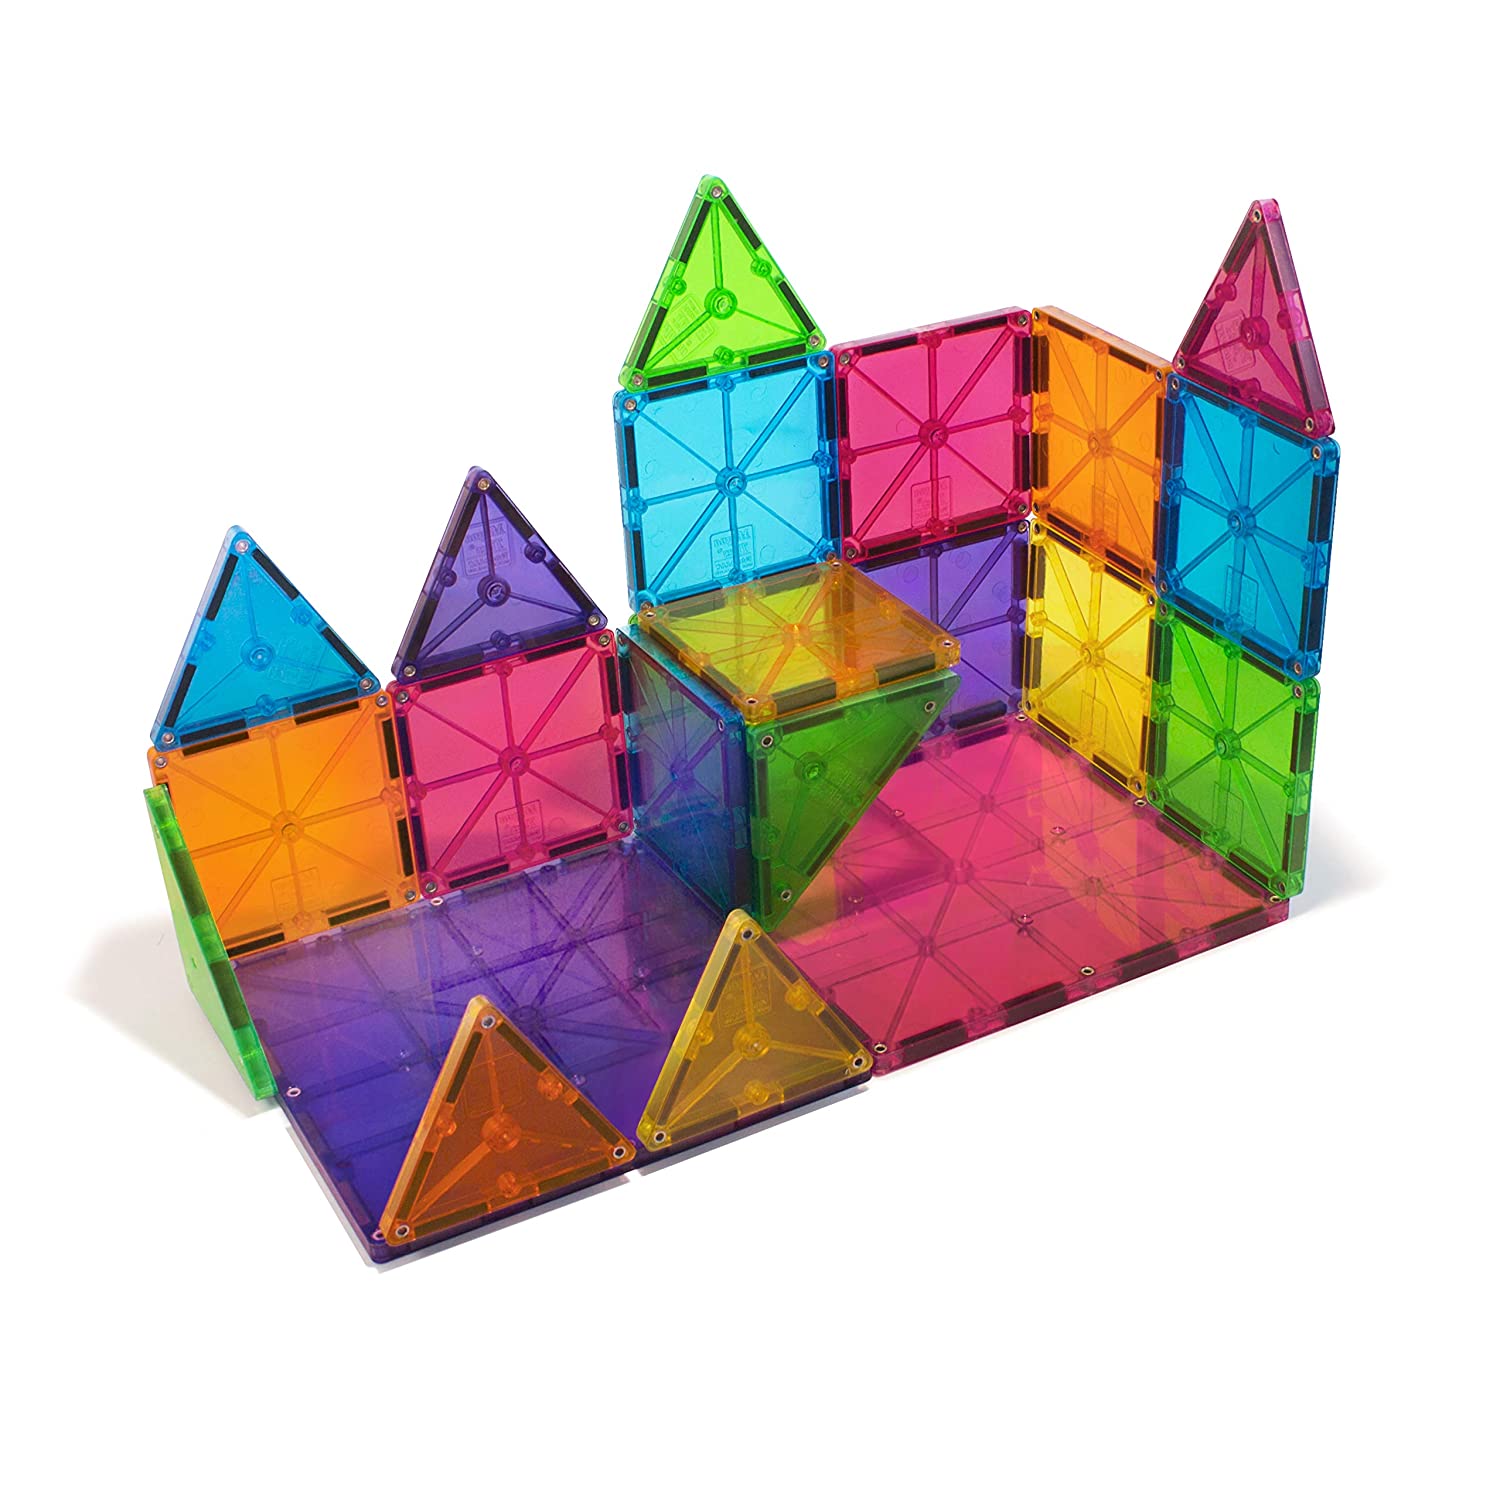 Magna-Tiles 32-Piece Clear Colors Set, The Original Magnetic Building Tiles For Creative Open-Ended Play, Educational Toys For Children Ages 3 Years +